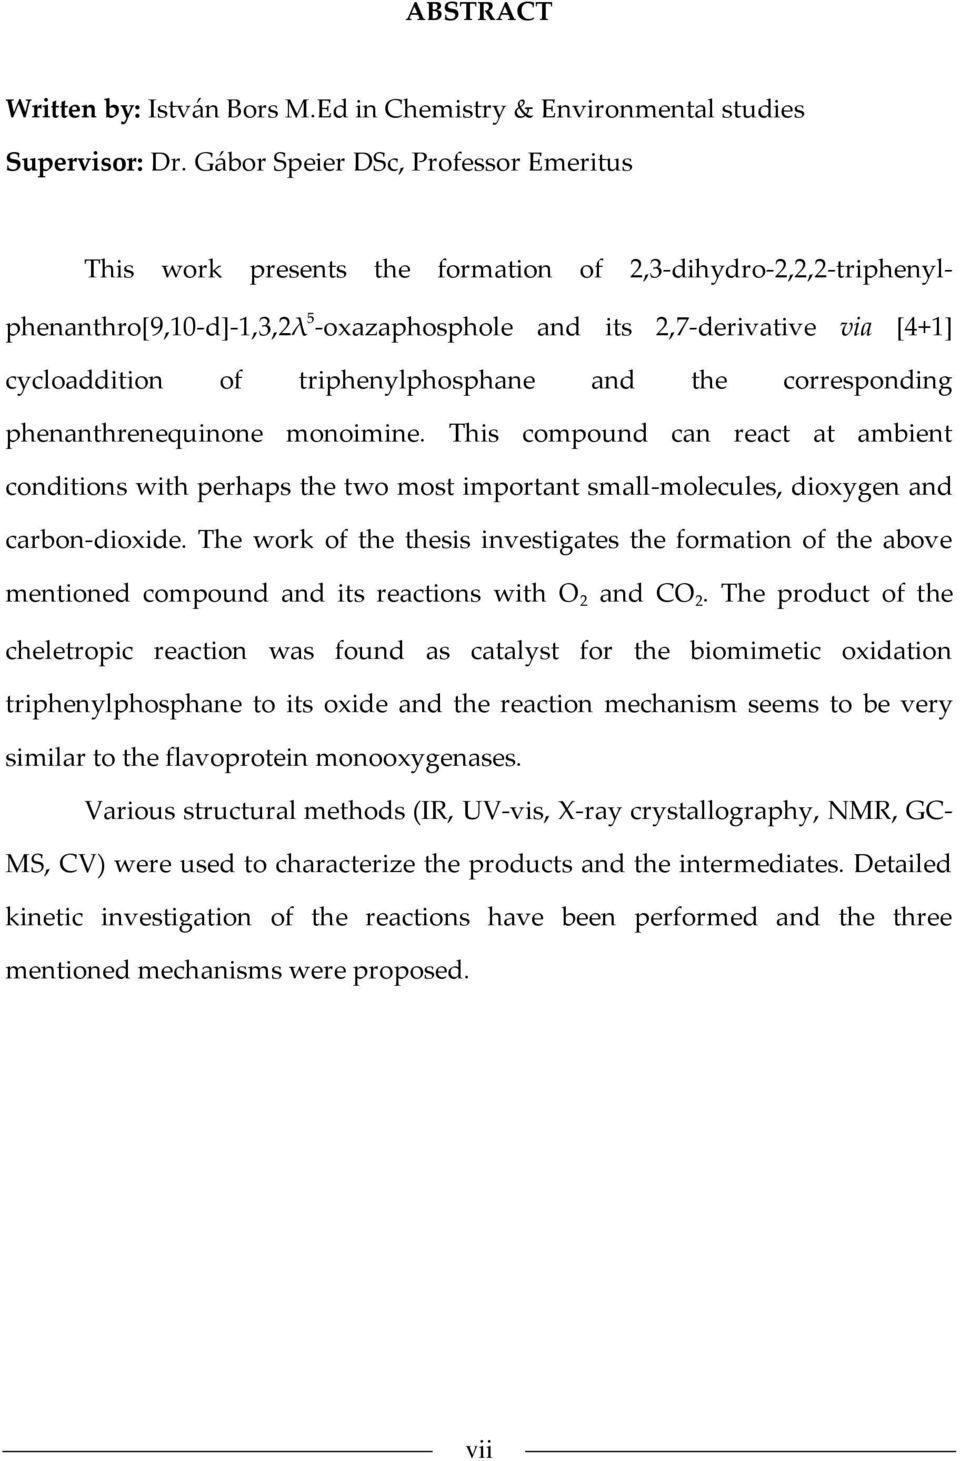 triphenylphosphane and the corresponding phenanthrenequinone monoimine. This compound can react at ambient conditions with perhaps the two most important small-molecules, dioxygen and carbon-dioxide.